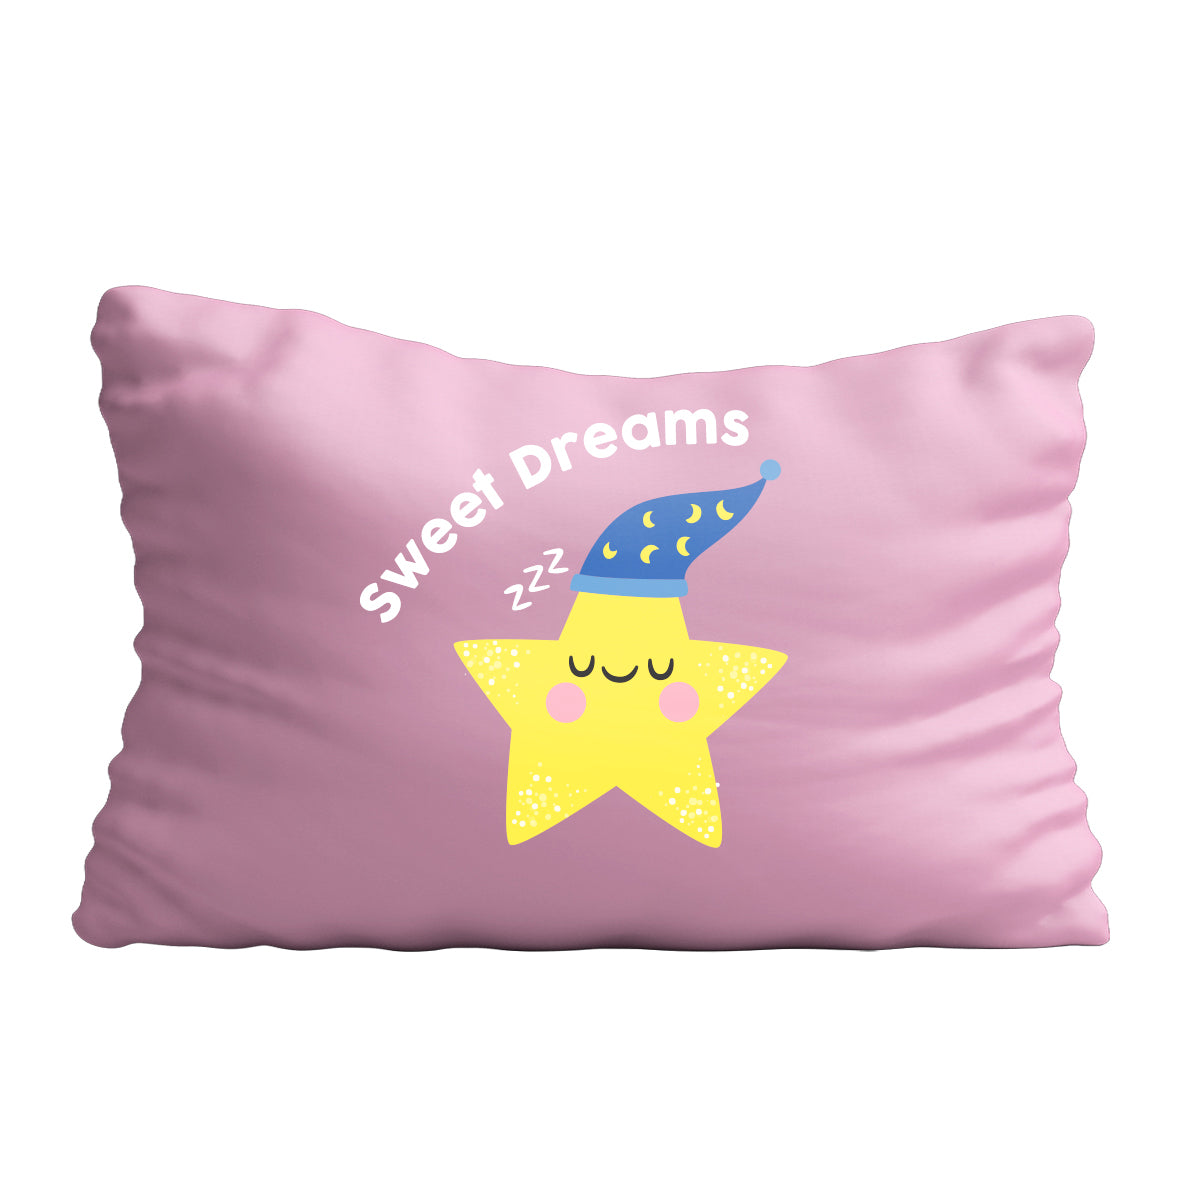 Sweet dreams name pink pillow case - Wimziy&Co.